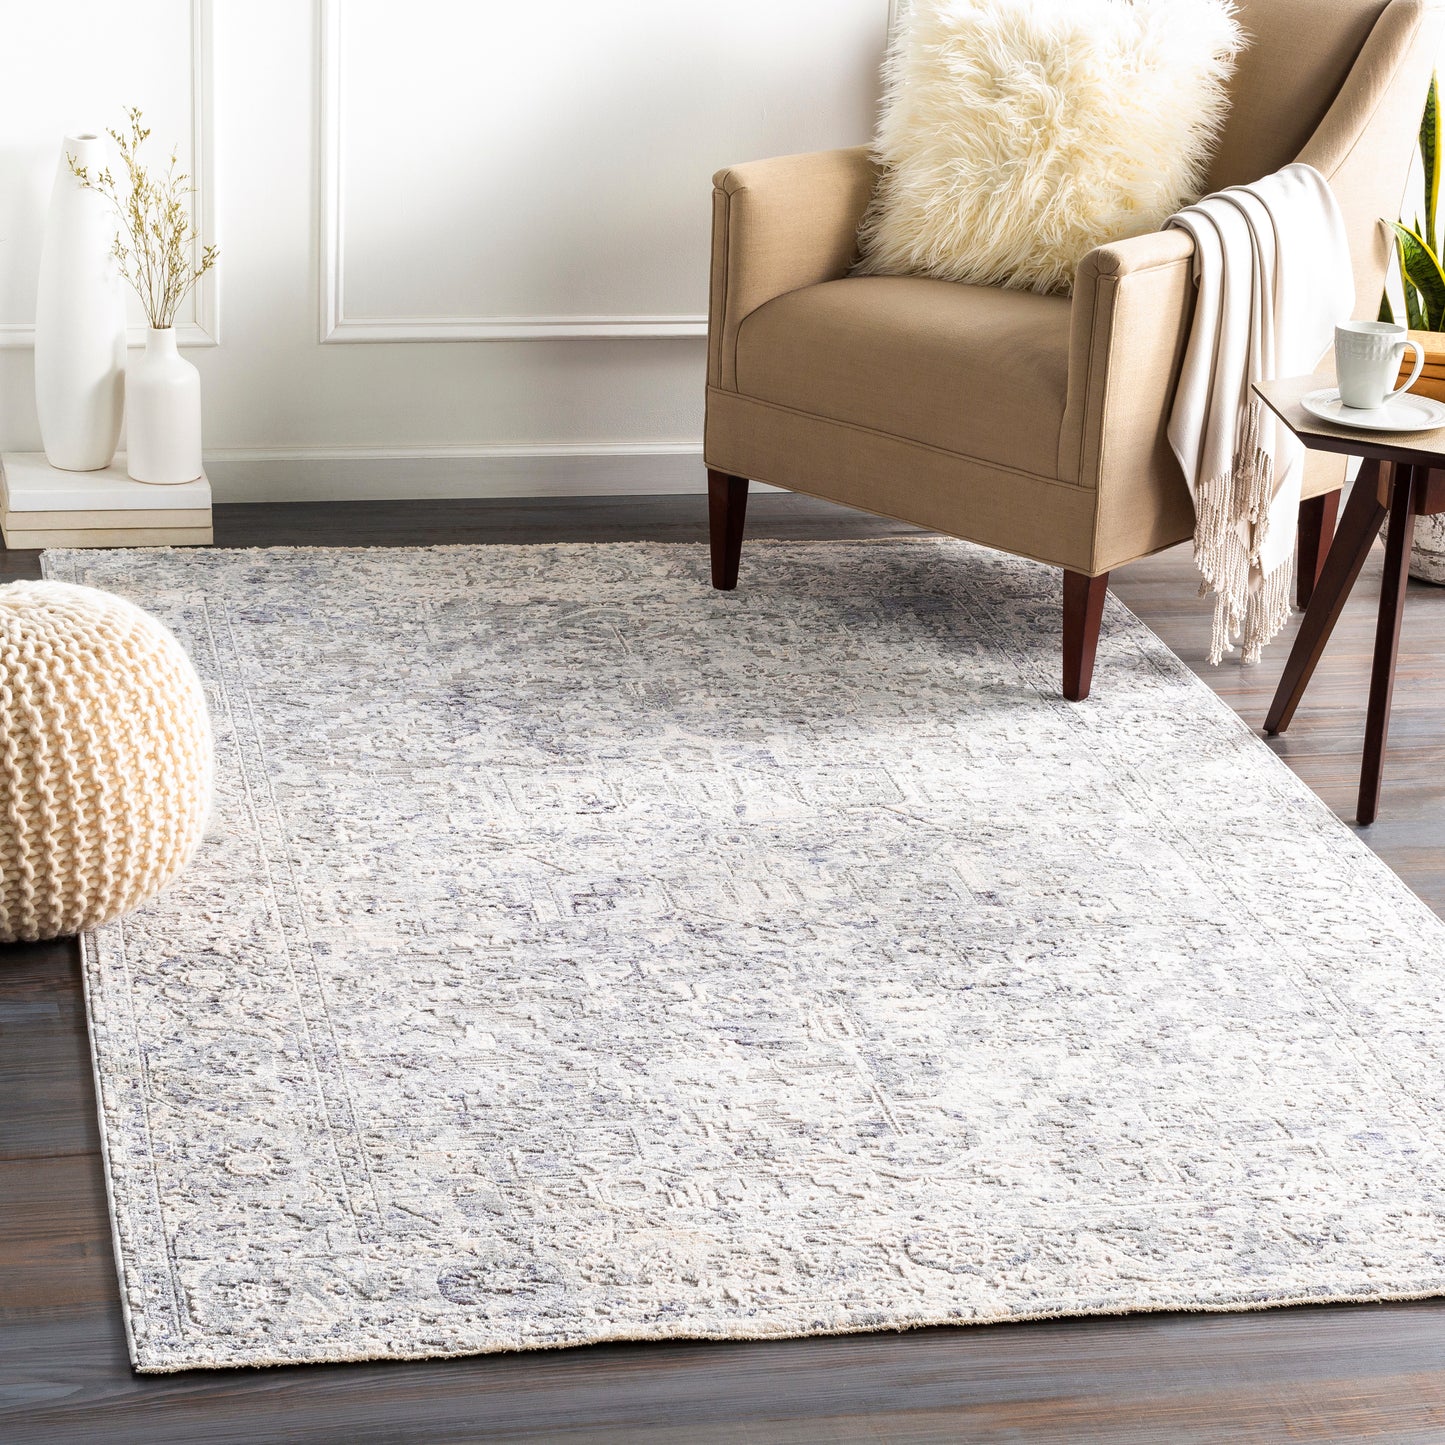 Presidential 24890 Machine Woven Synthetic Blend Indoor Area Rug by Surya Rugs